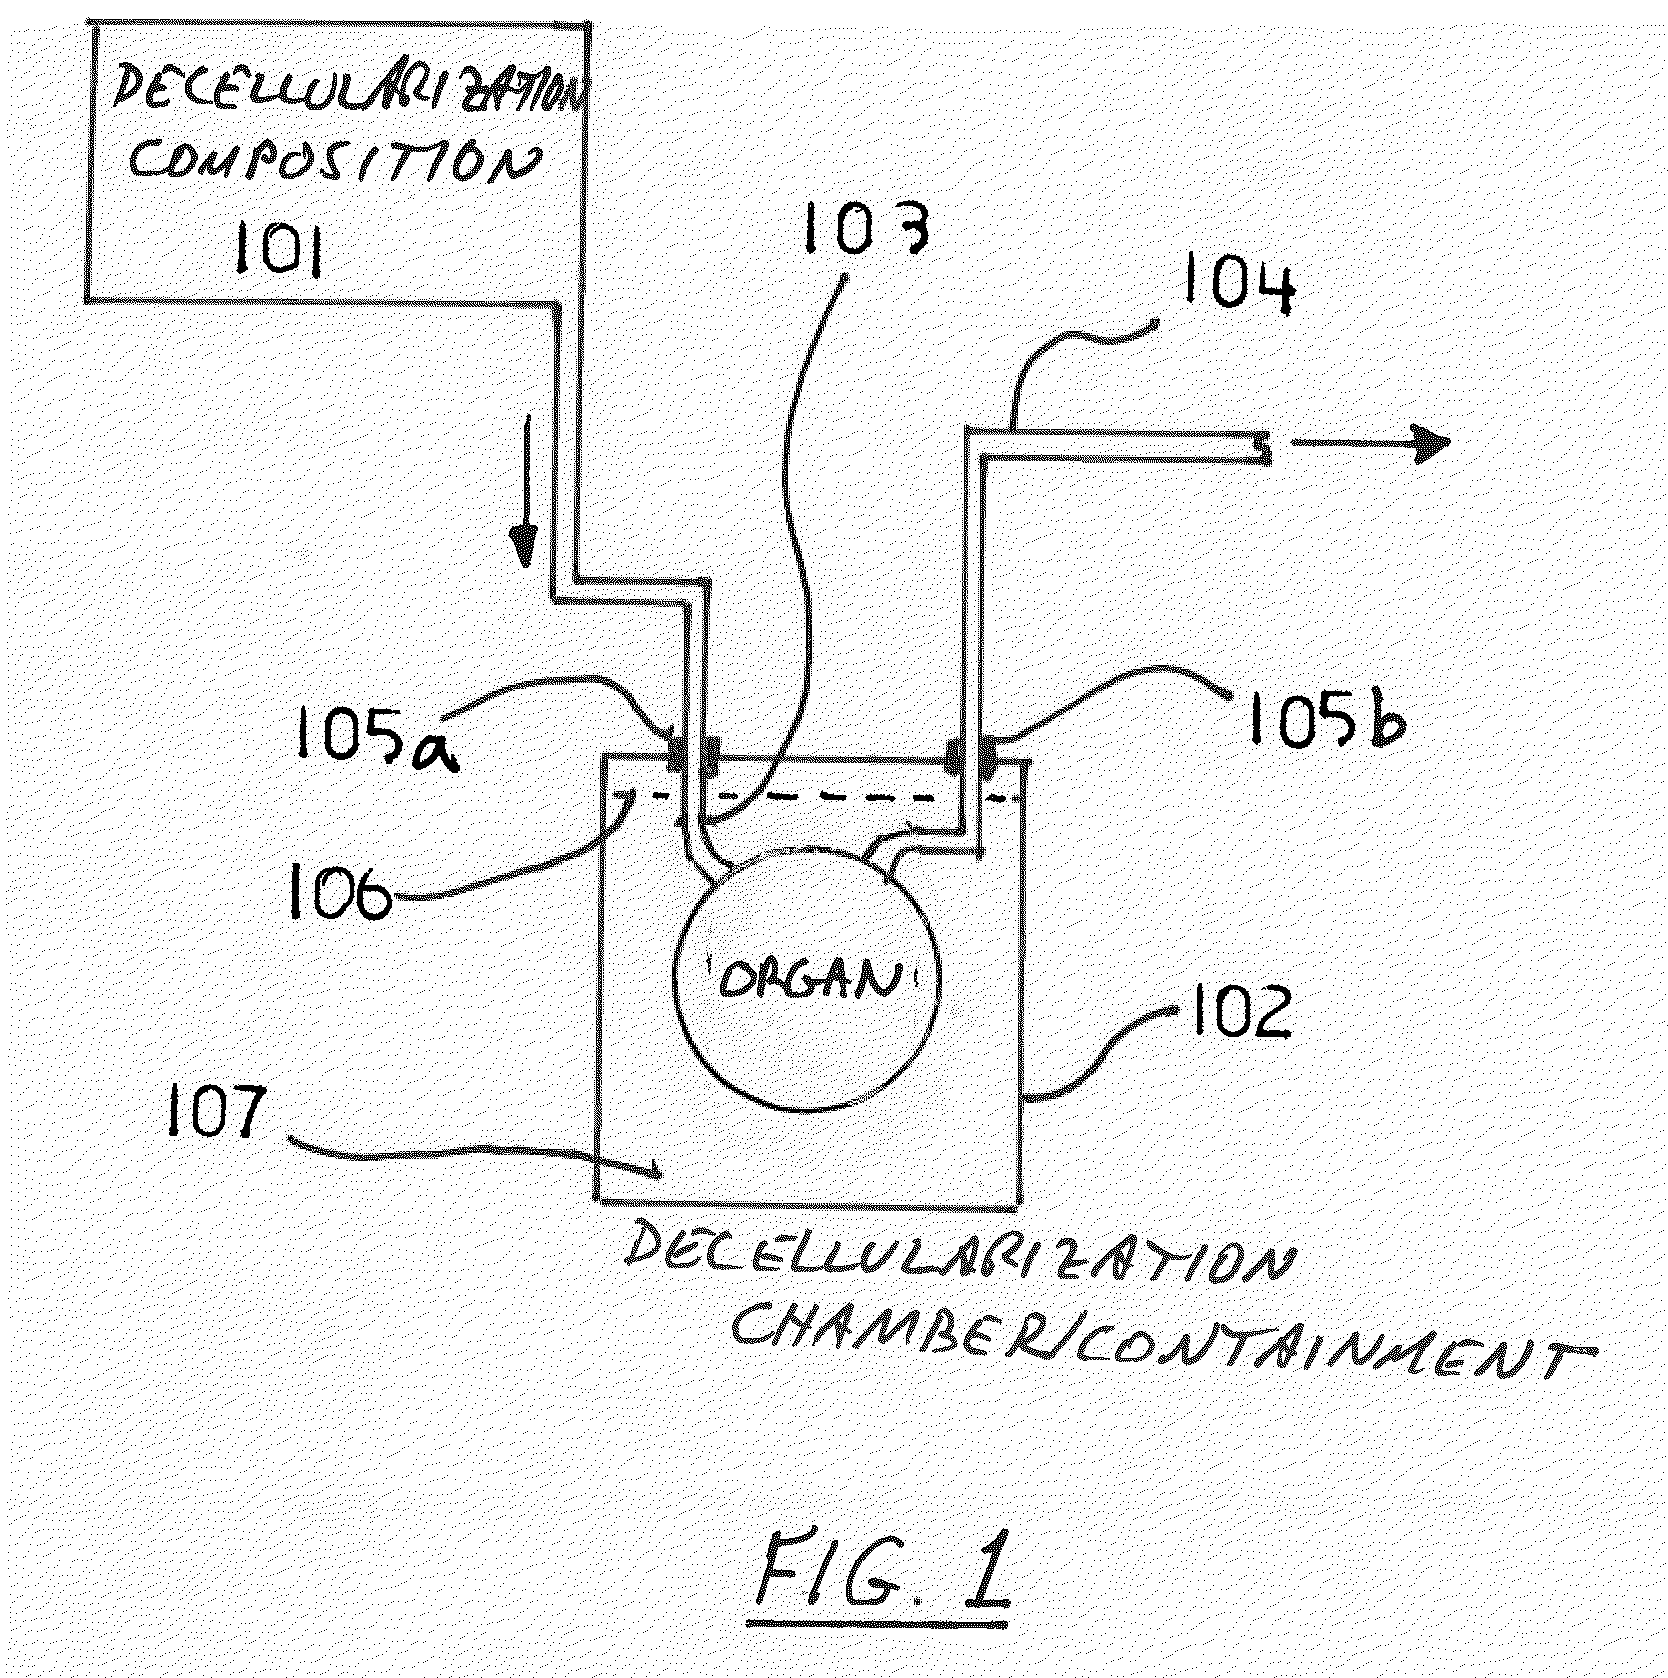 Decellularization and recellularization apparatuses and systems containing the same